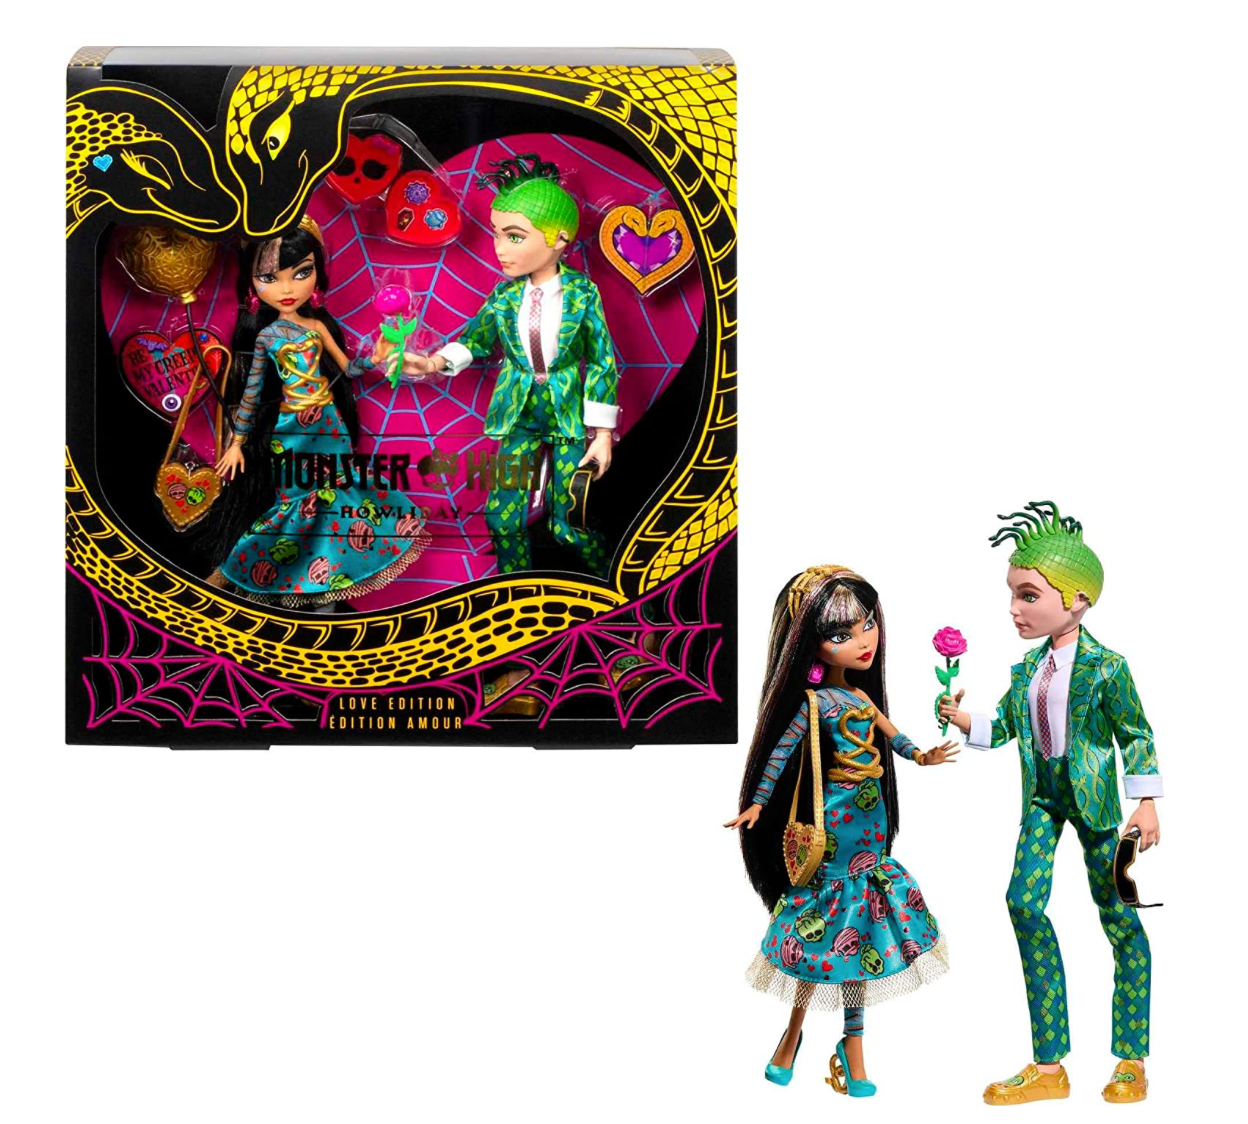 Monster High Dolls Cleo De Nile and Deuce Gorgon Two-Pack Doll New With Box